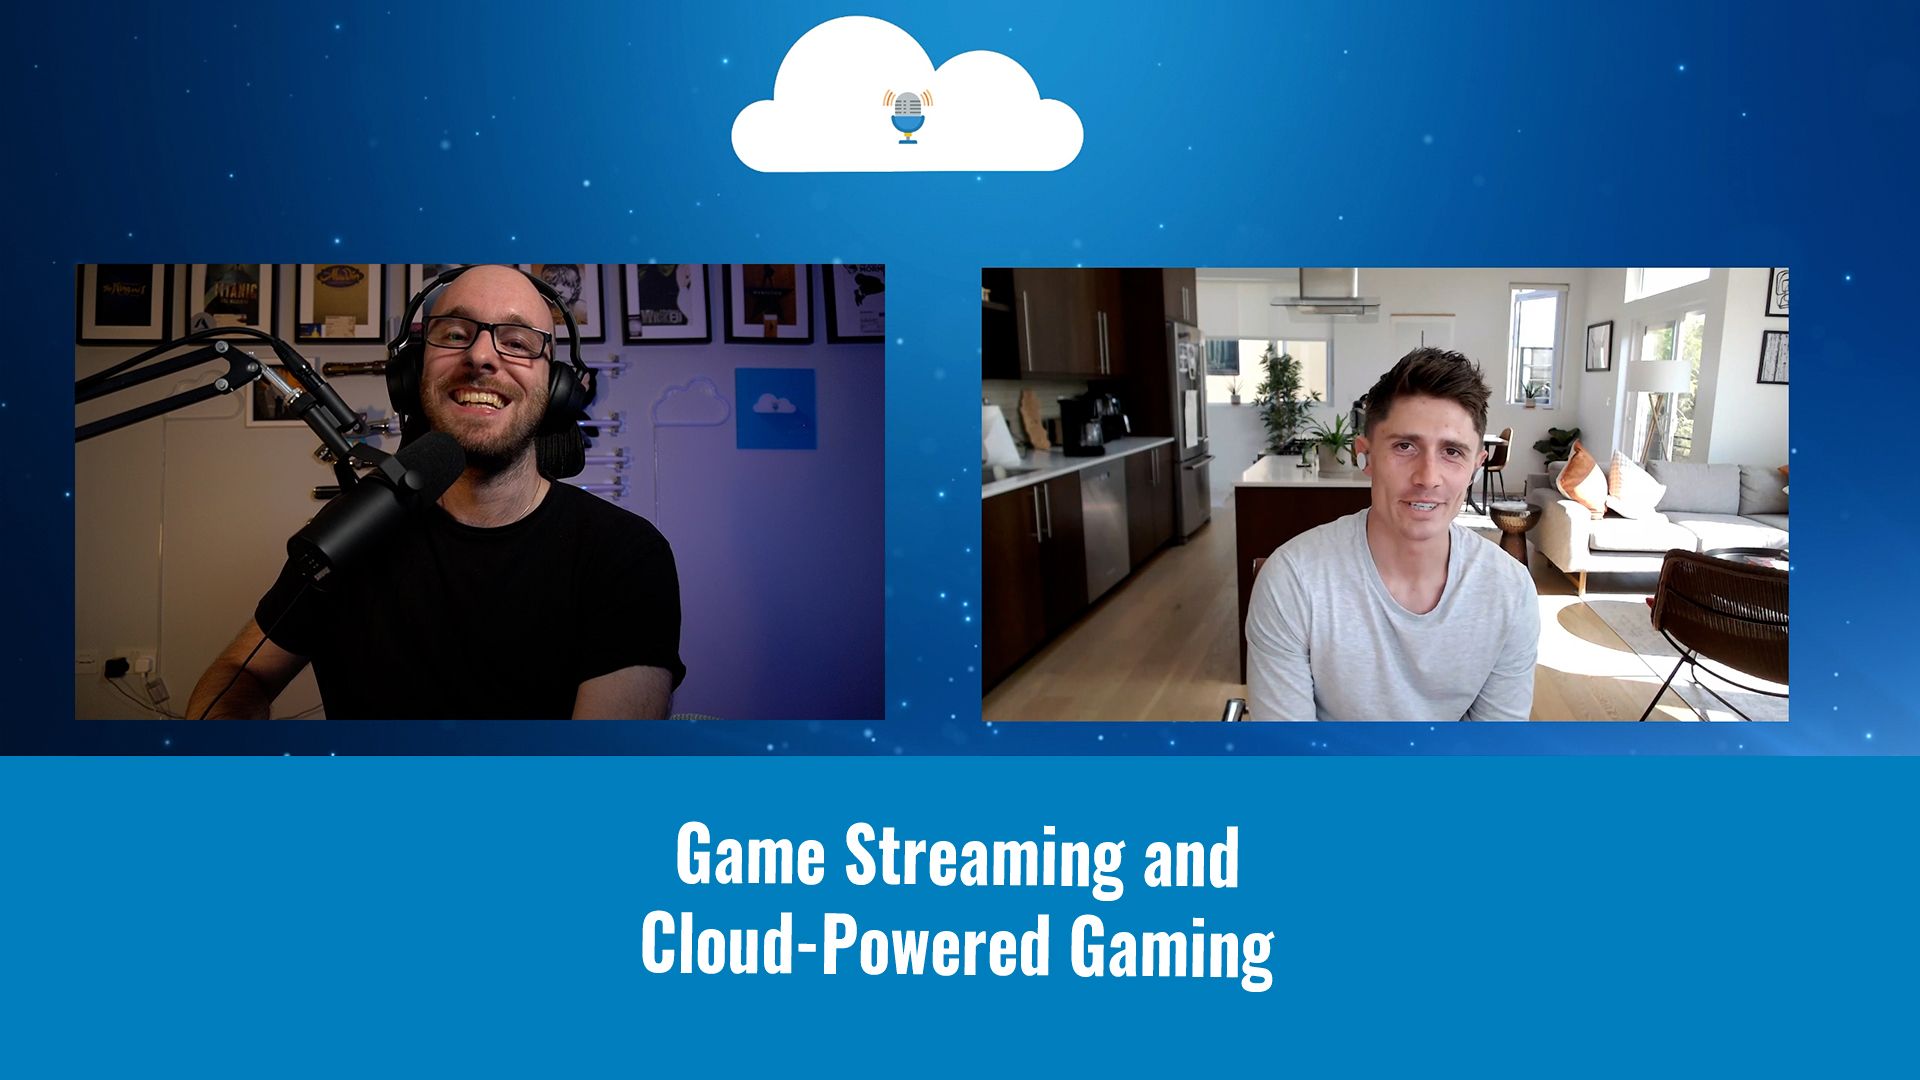 CGN7 - Cloud Gaming Notes Episode 7 - Game Streaming and Cloud-Powered Gaming